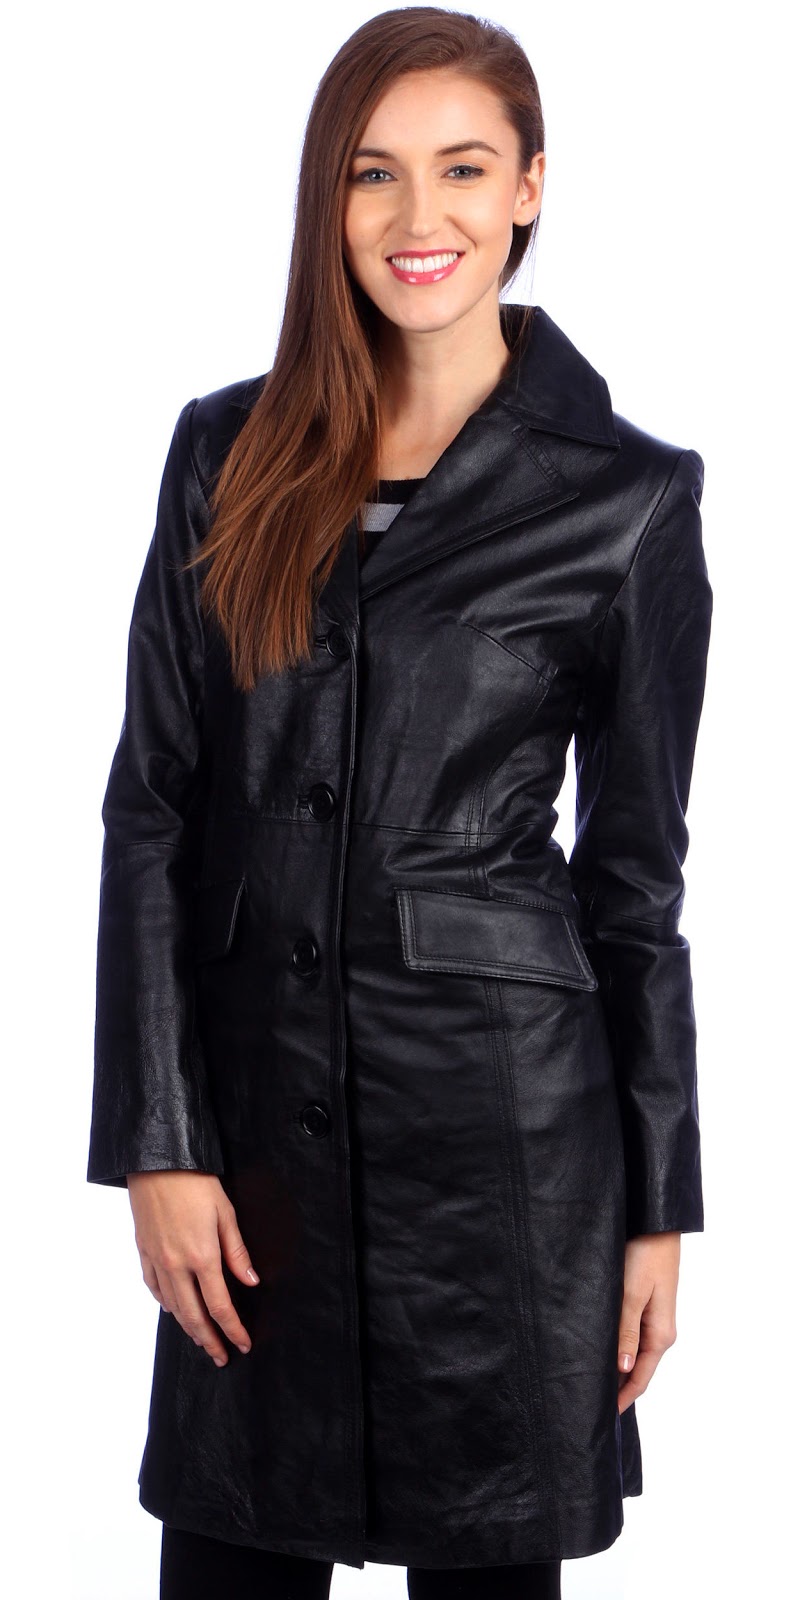 Leather Coat Daydreams: Overstock leather coats